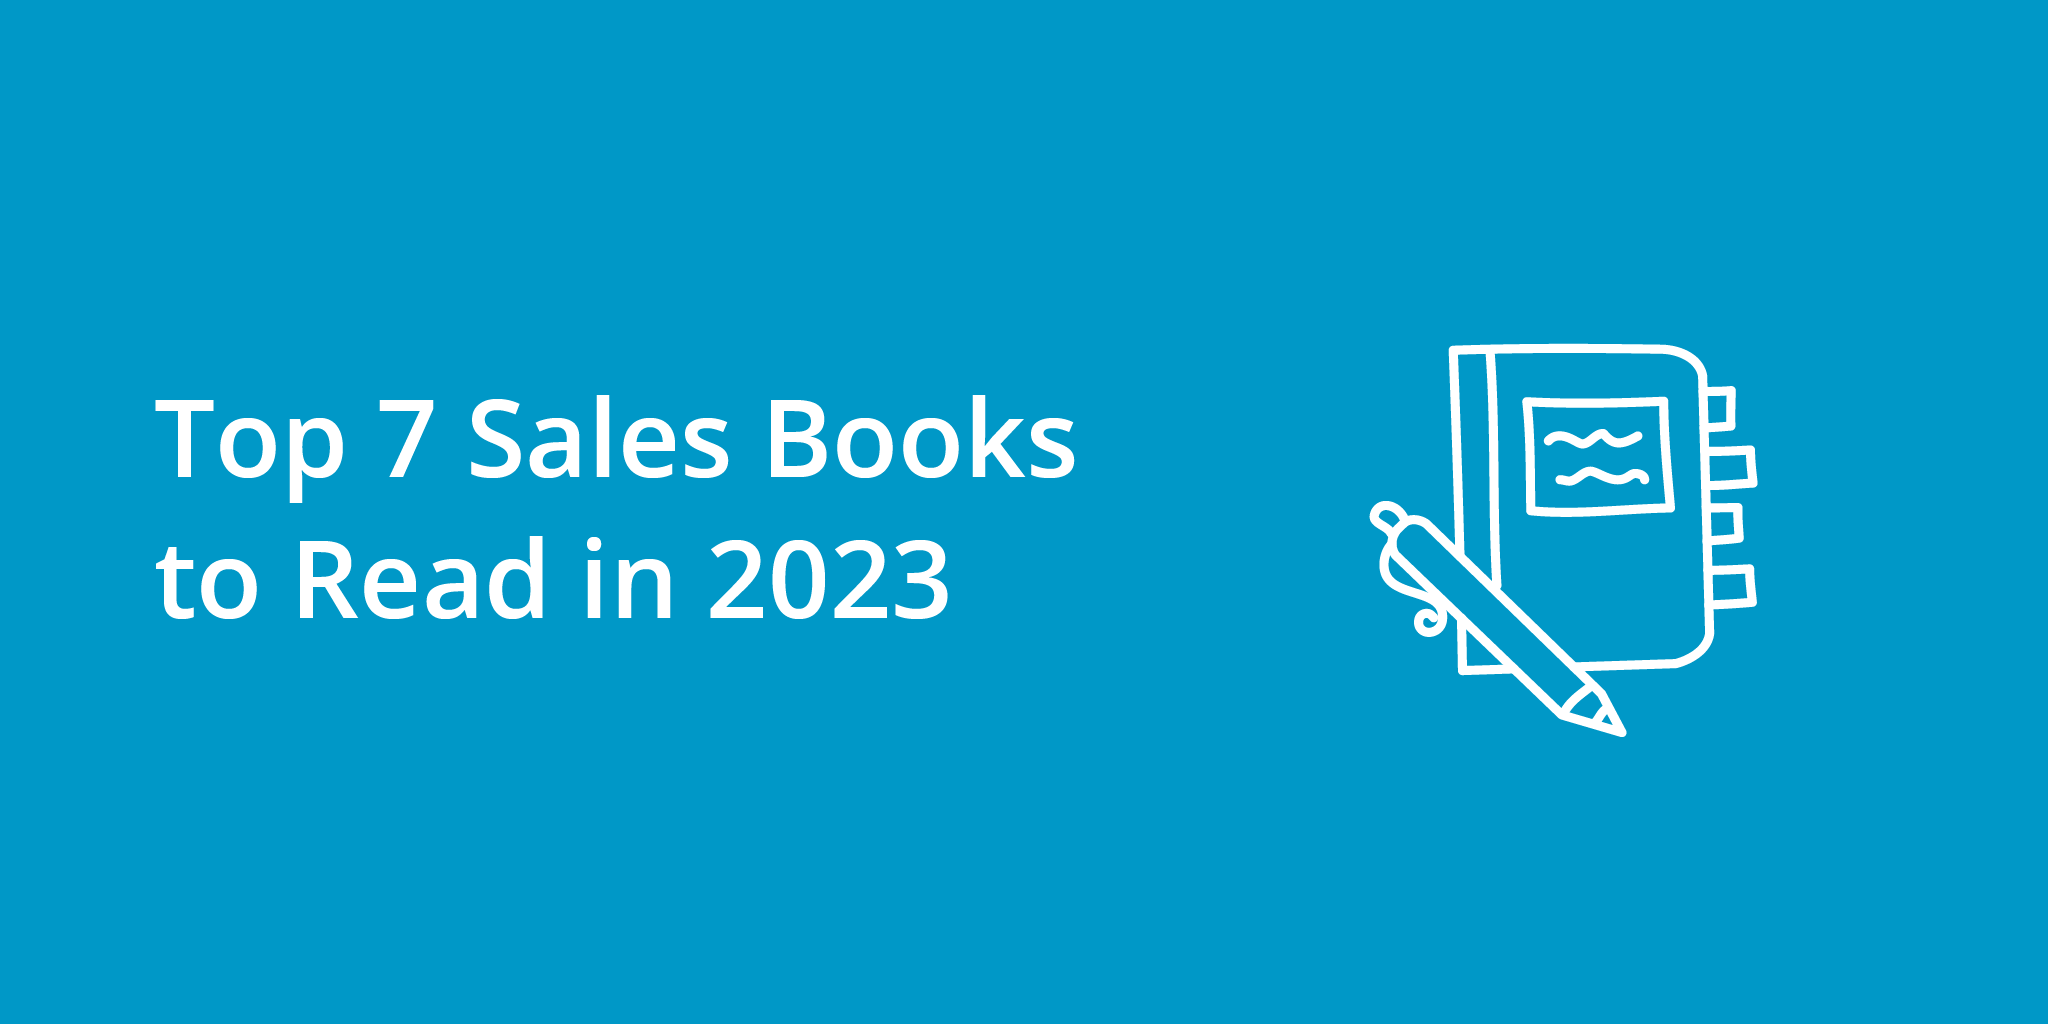 Top 7 Sales Books to Read in 2023 | Telephones for business